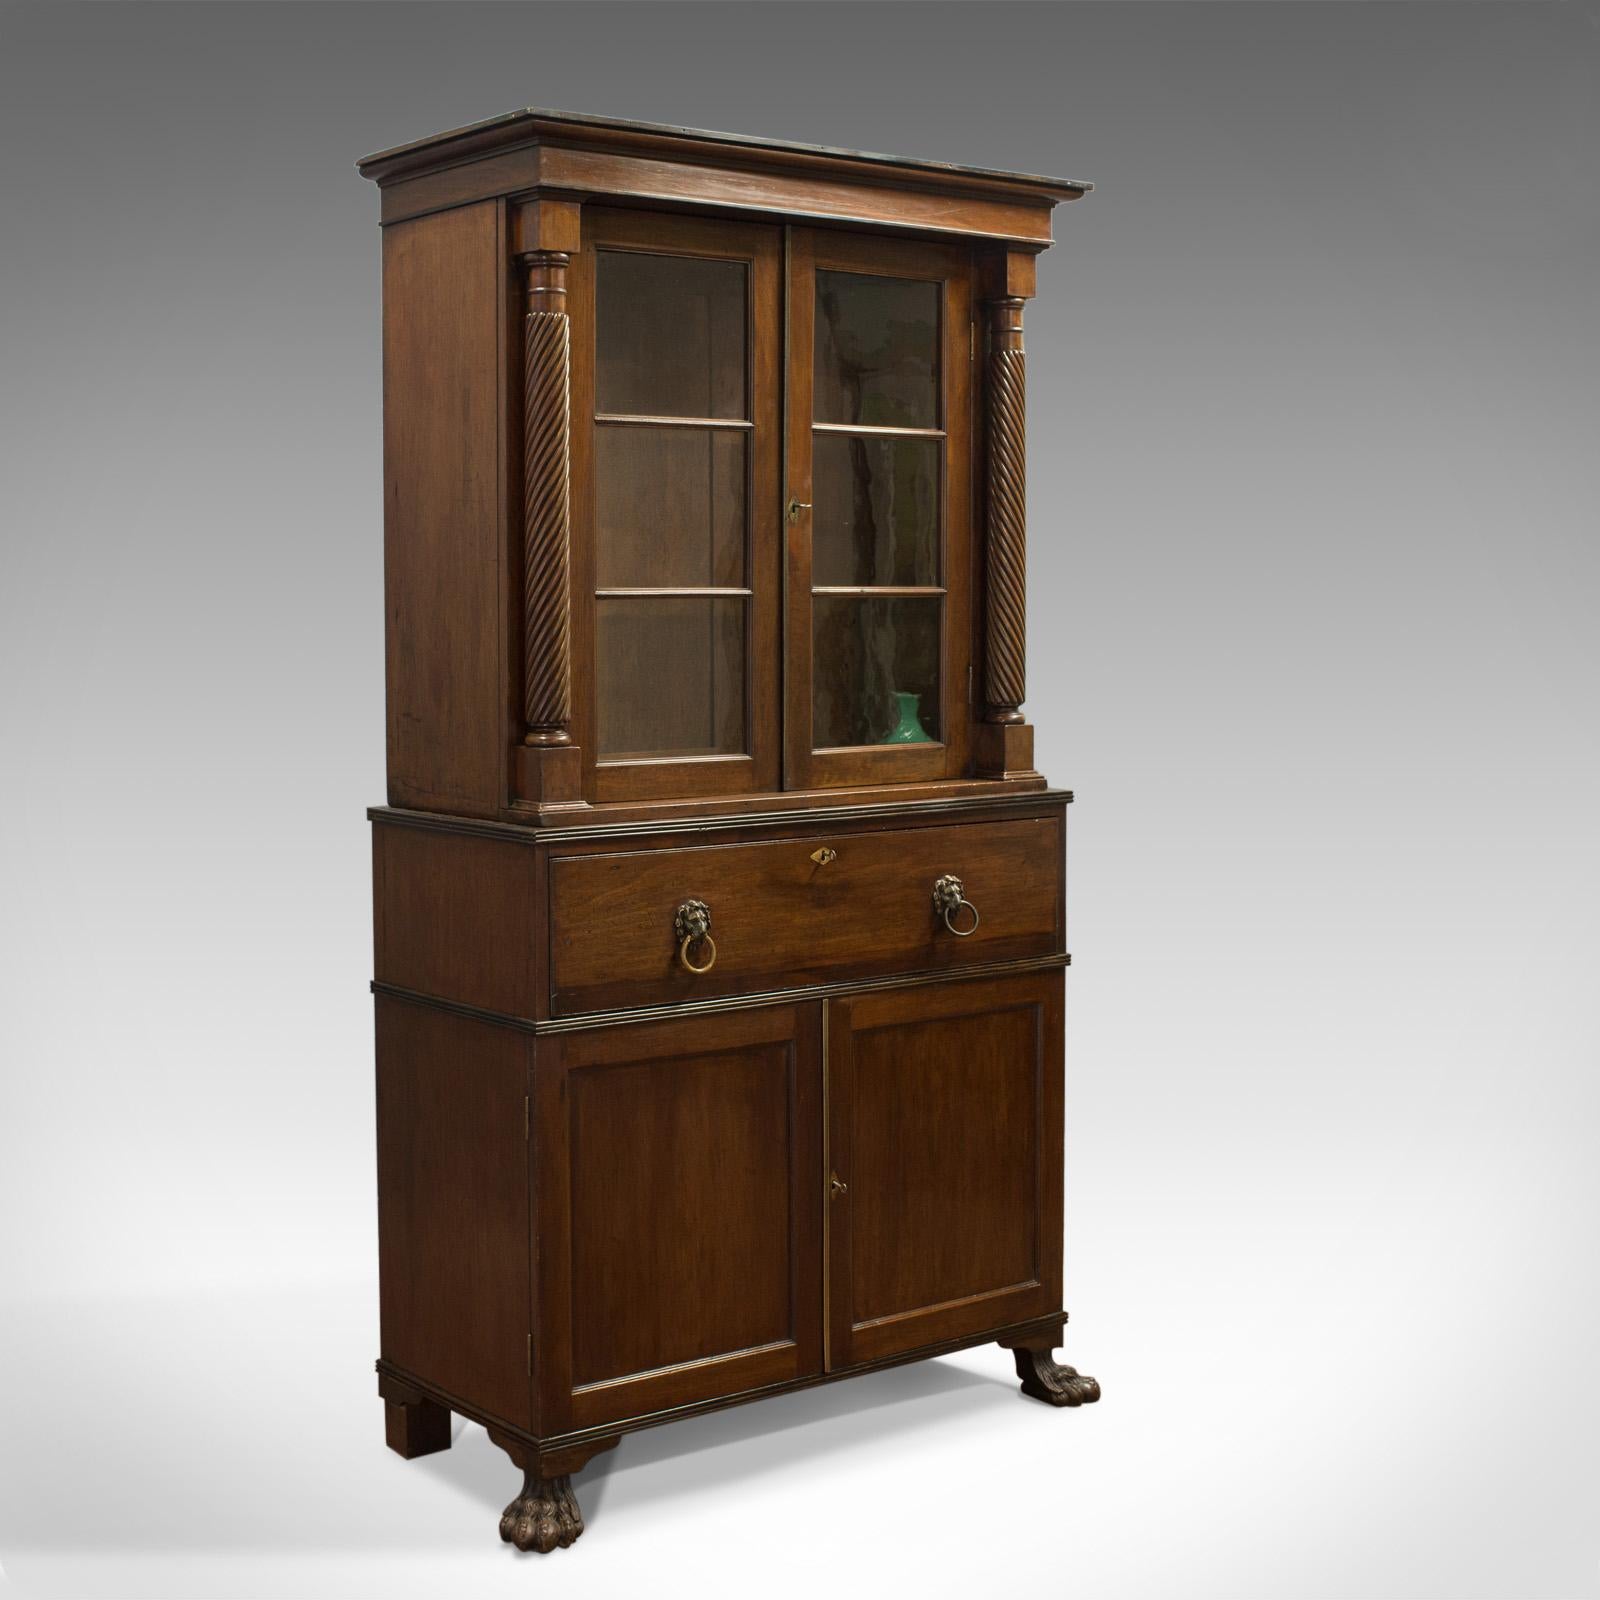 This is an antique secretaire bookcase. A Scottish, mahogany cabinet dating to the late Victorian period of the 19th century, circa 1880

A fine and rare example in very good order
Crafted in choice cuts of quality mahogany
Good consistent color